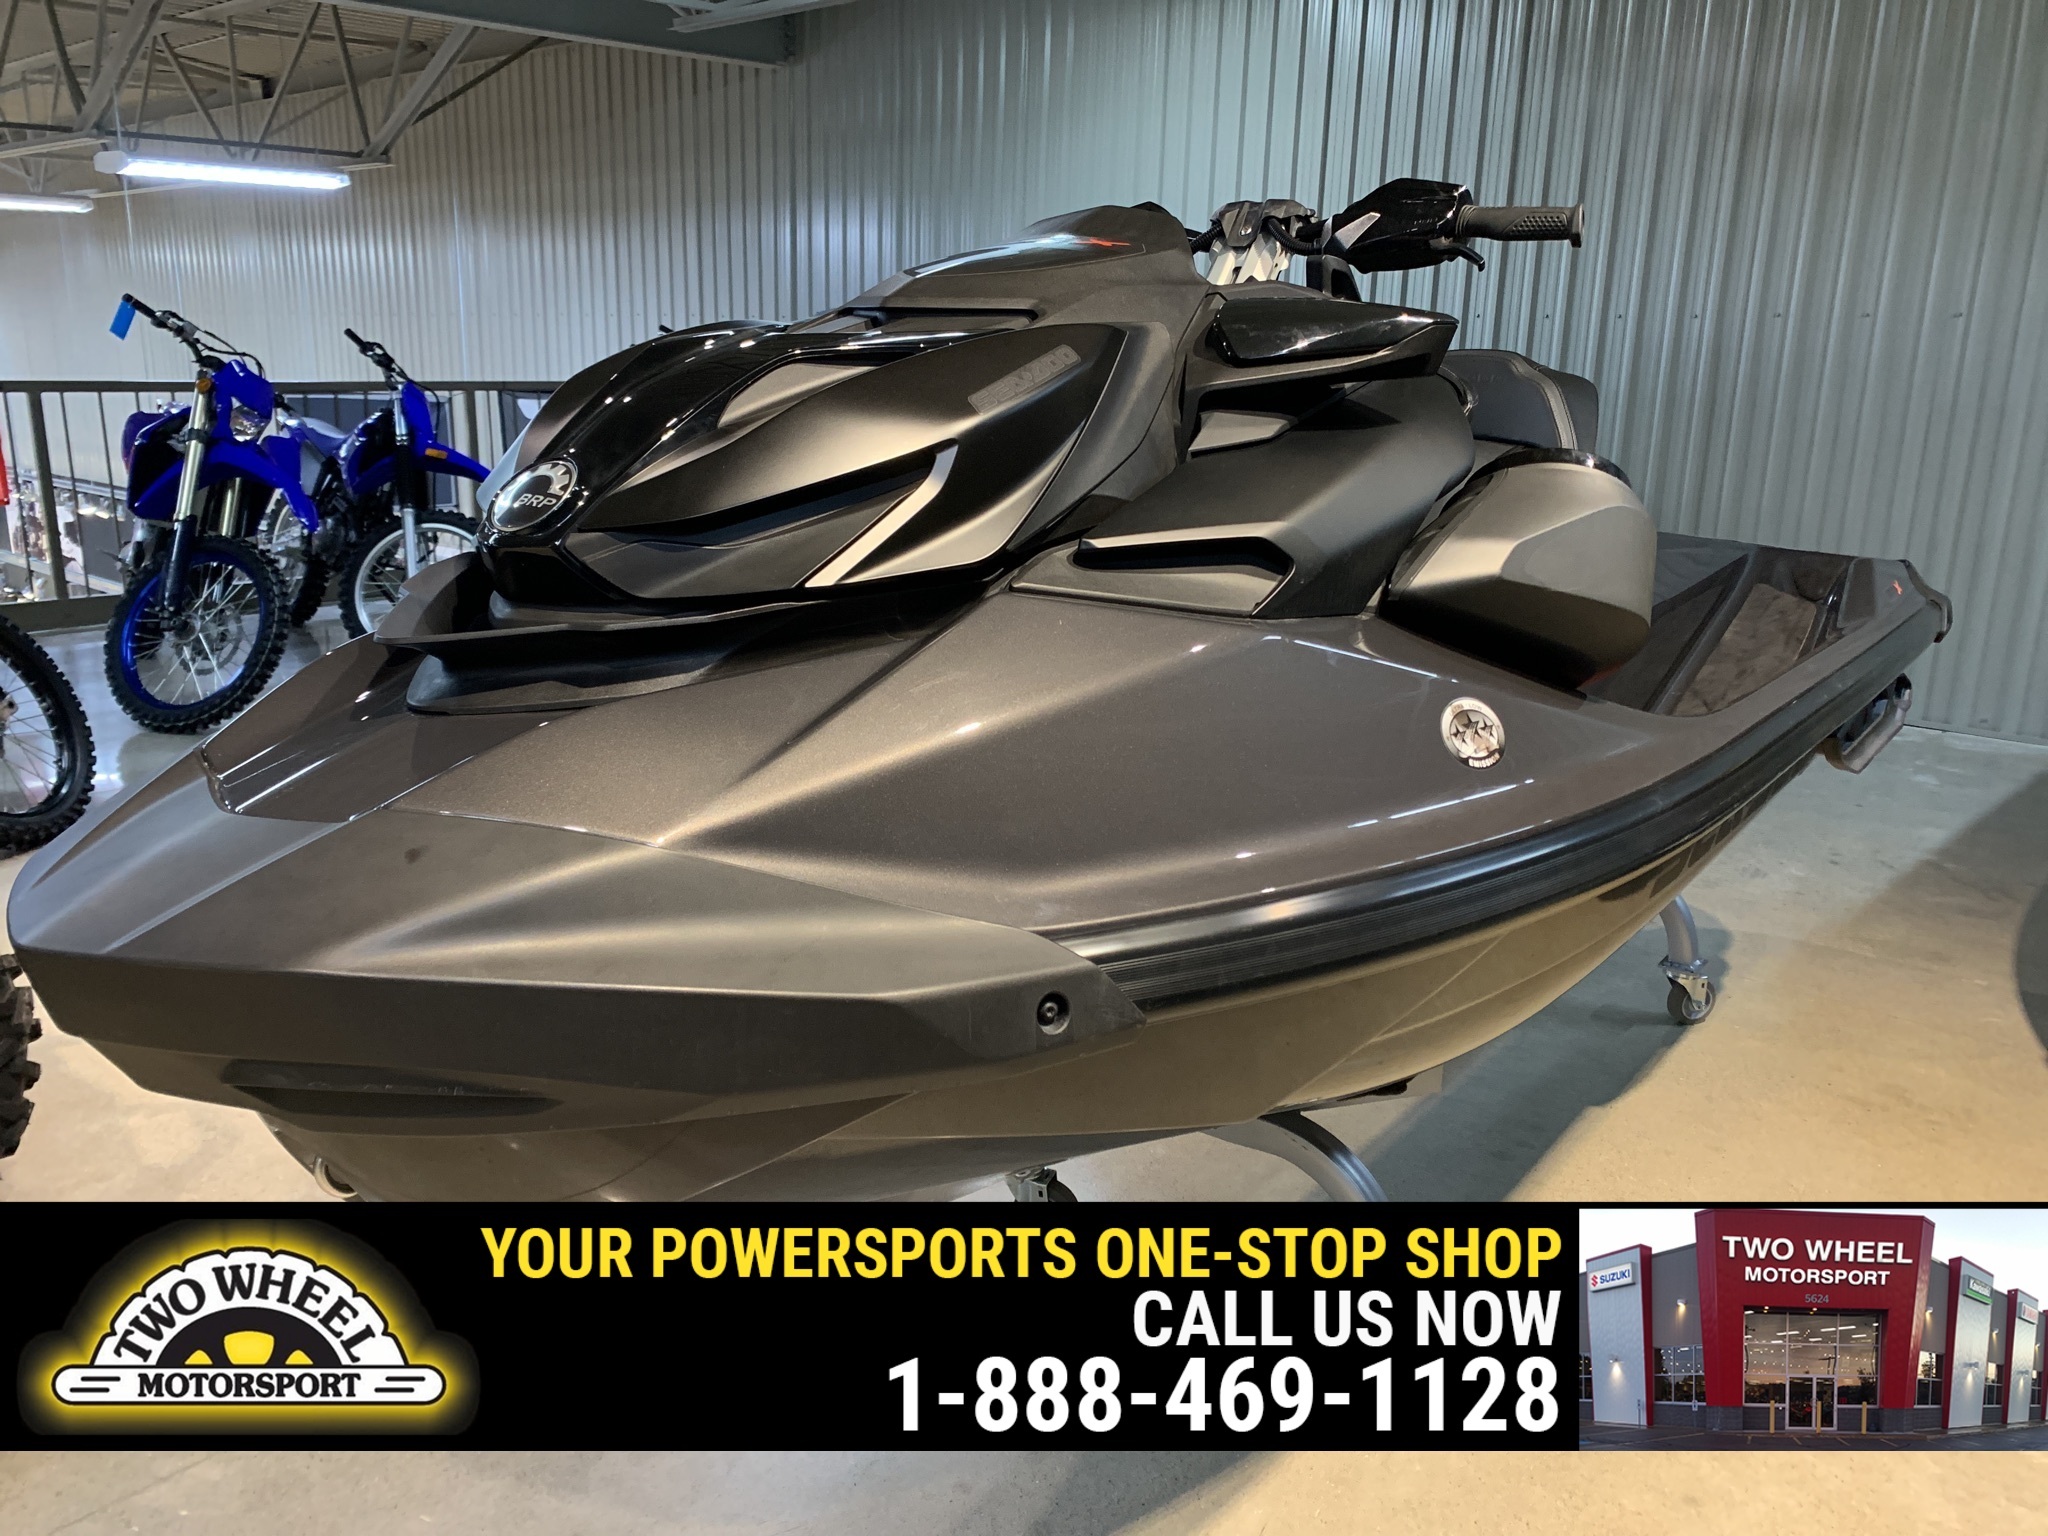 2021 Sea-Doo RXP-X300 RXPX300 WITH SOUND